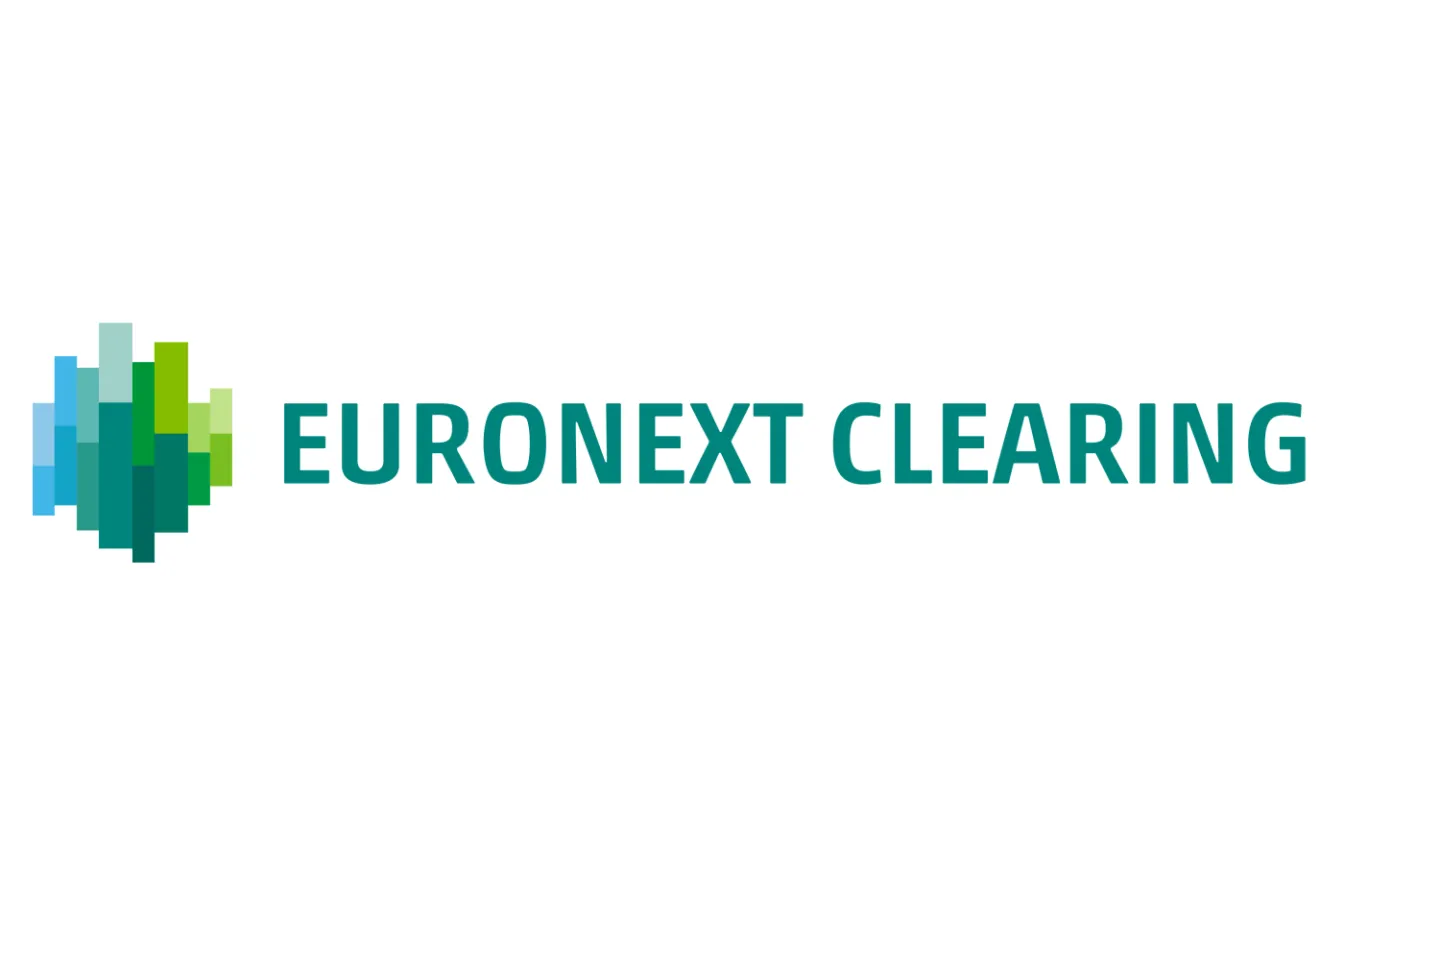 Euronext Clearing